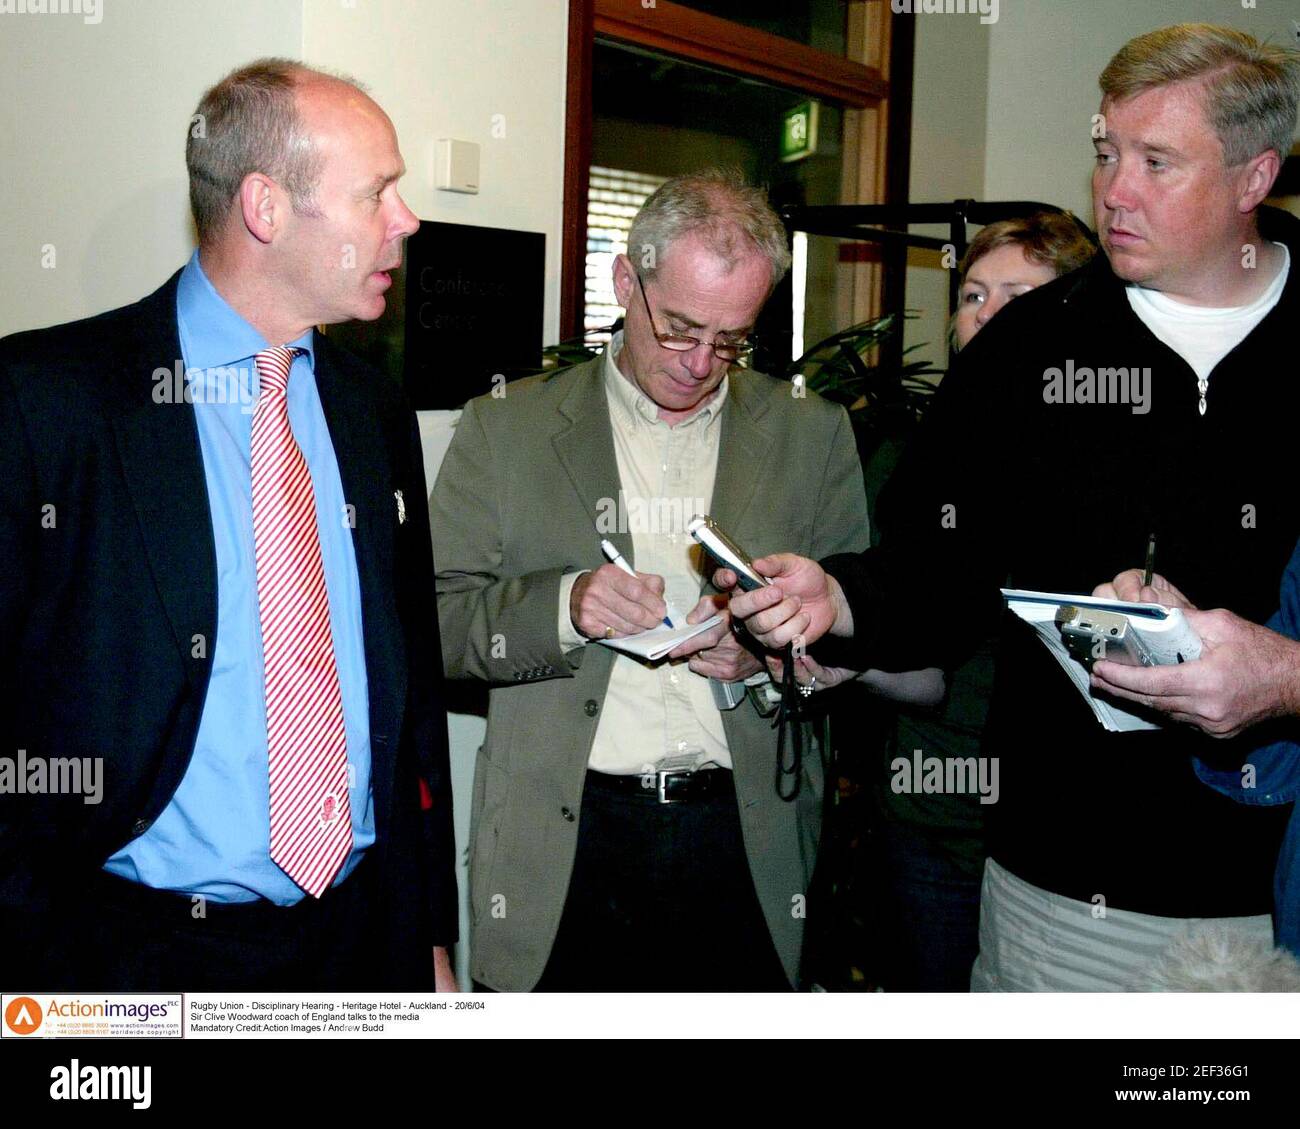 Rugby Union - Disciplinary Hearing - Heritage Hotel - Auckland - 20/6/04  Sir Clive Woodward coach of England talks to the media  Mandatory Credit:Action Images / Andrew Budd Stock Photo